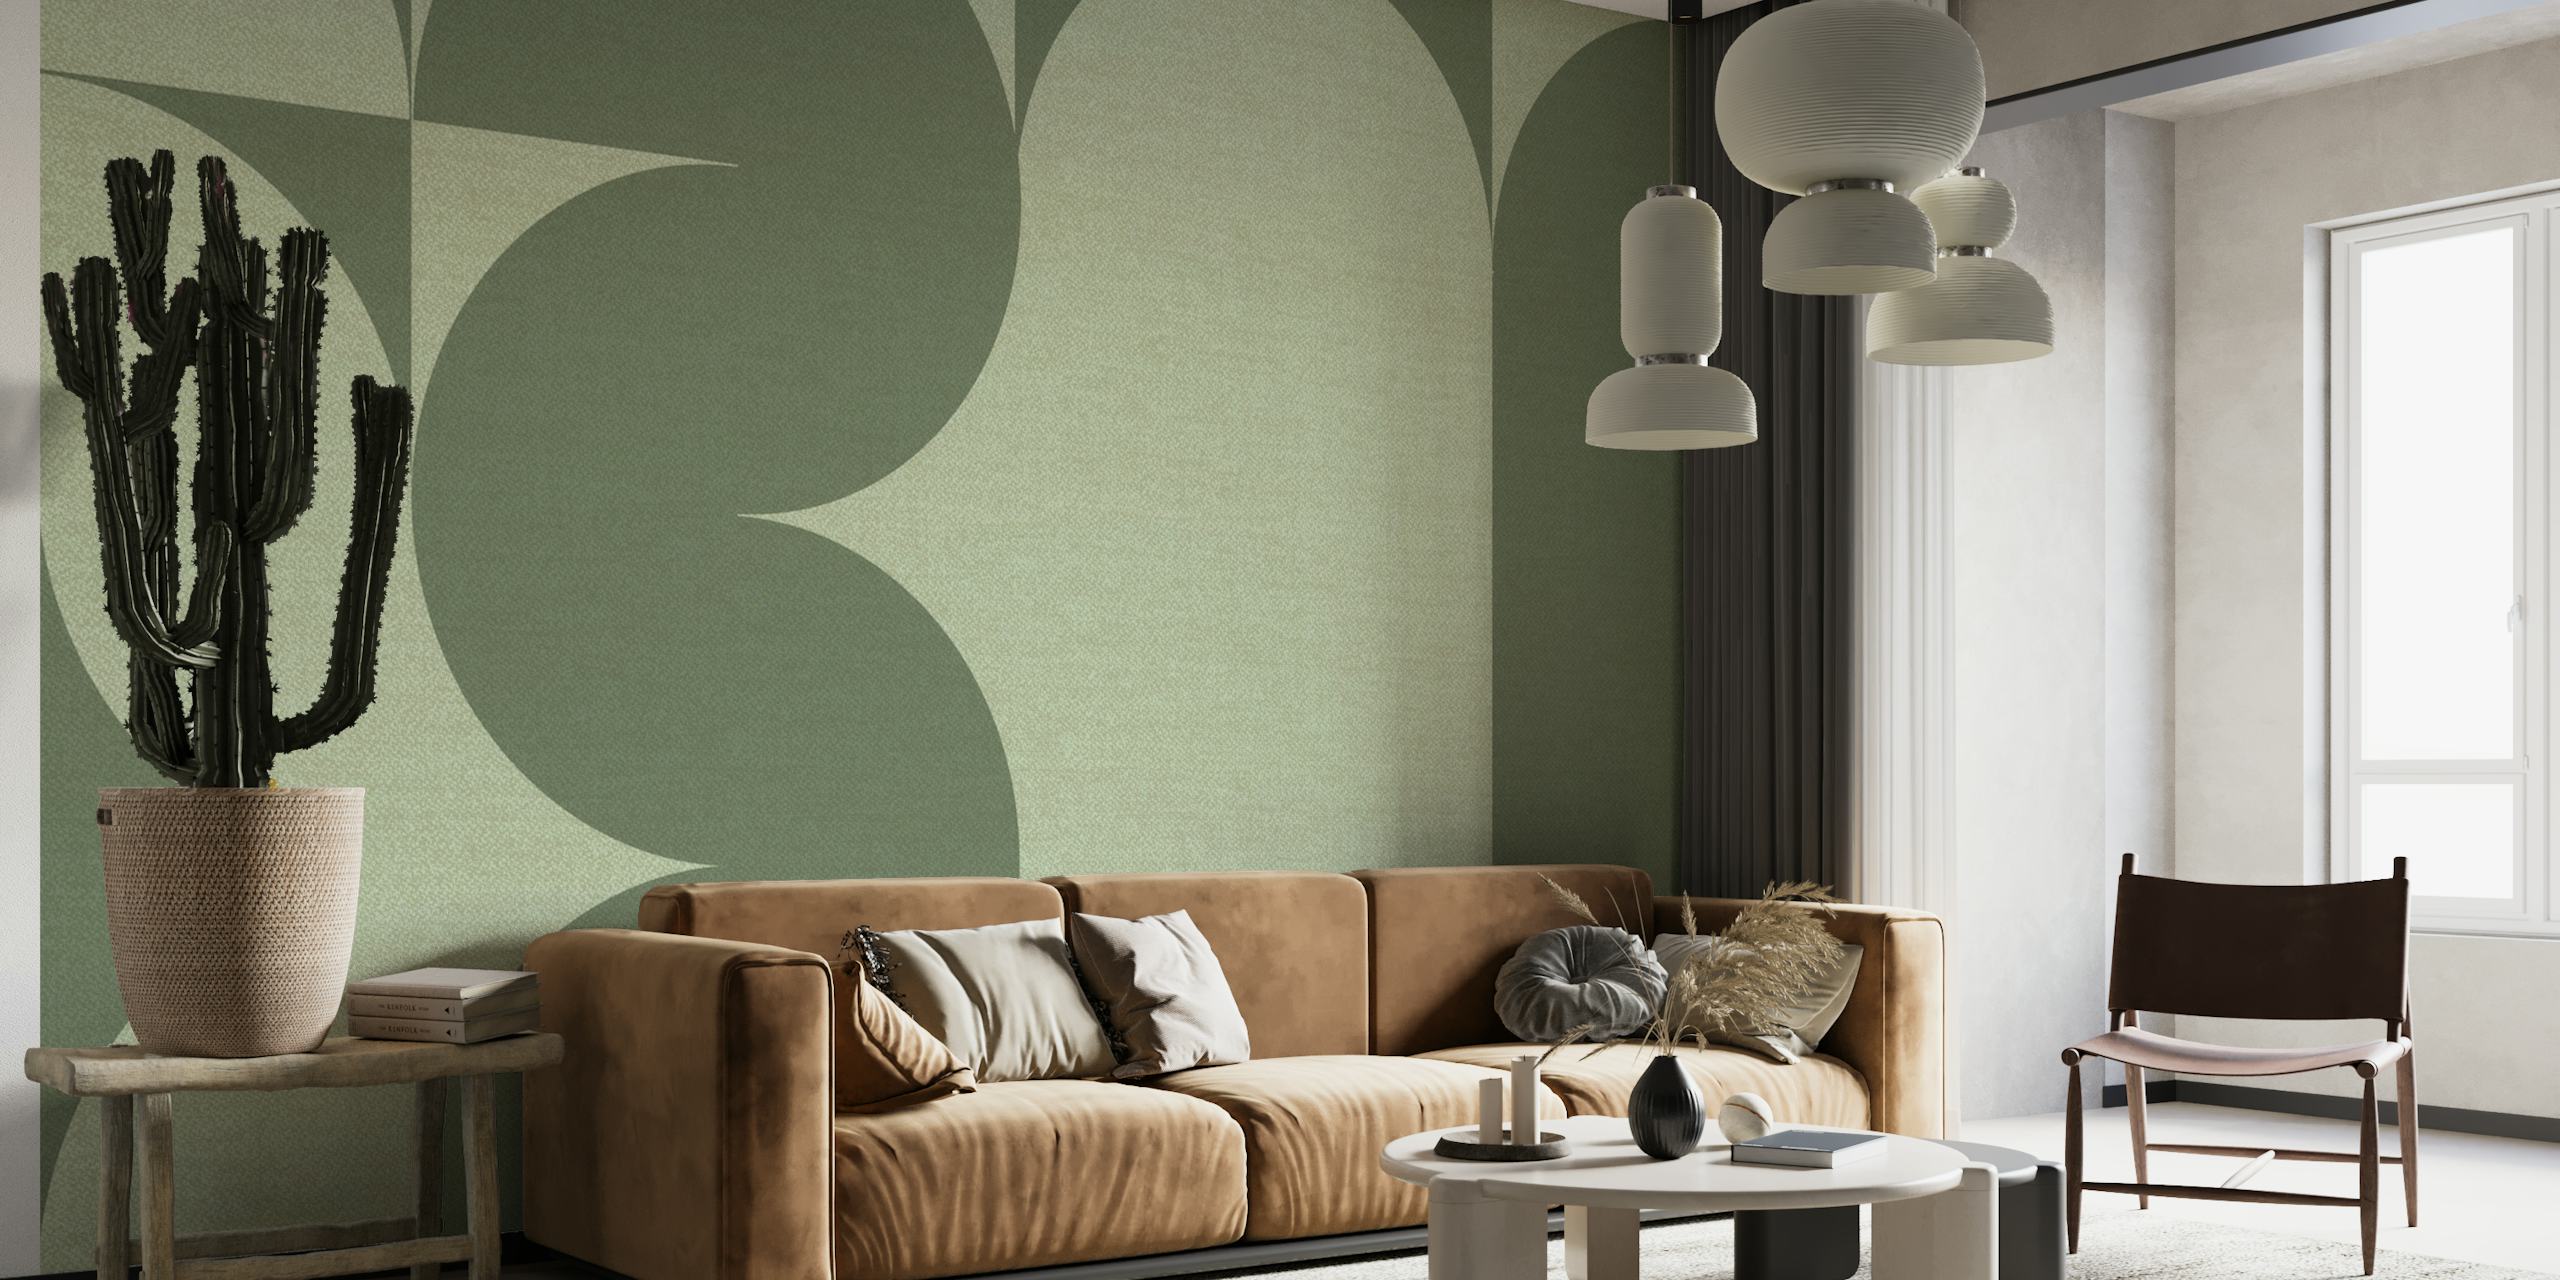 Mid-Century Linen Collage wall mural with abstract geometric pattern in soothing hues.